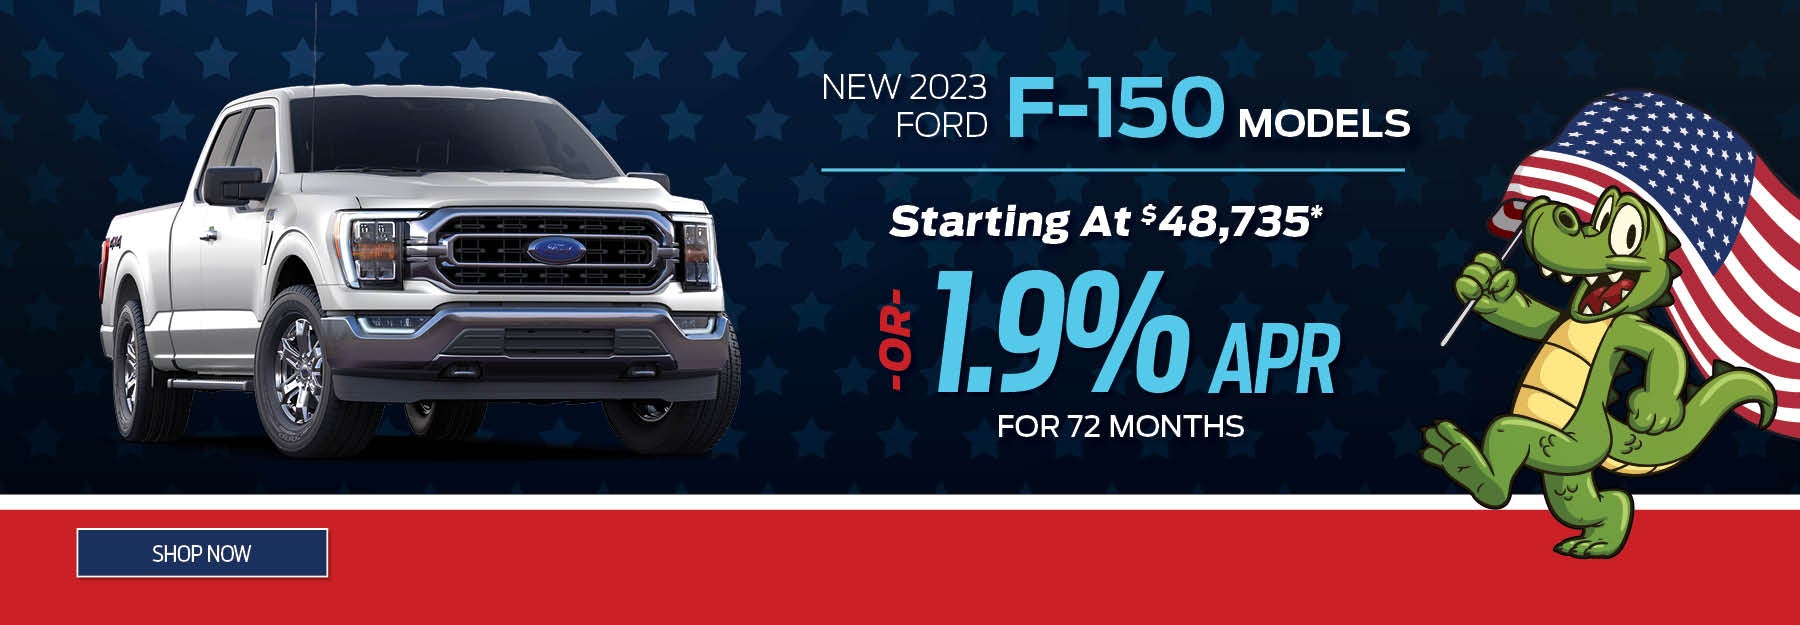 New 2023 F-150 Models in Gainesville FL